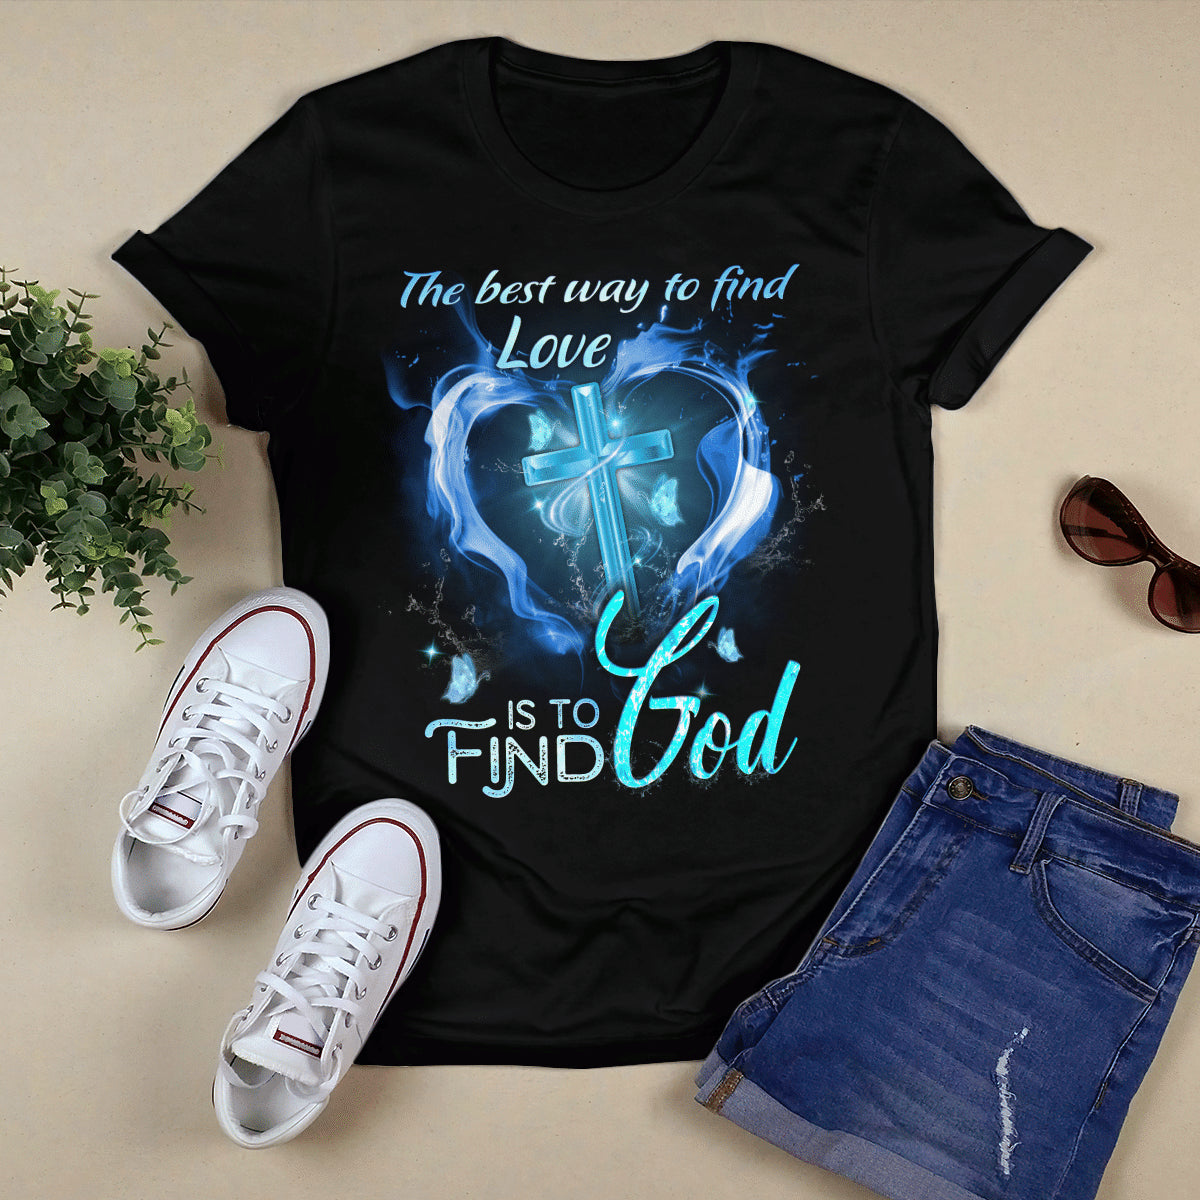 The Best Way To Find Love Is To Find God T-shirt - Jesus T-Shirt - Christian Shirts For Men & Women - Ciaocustom